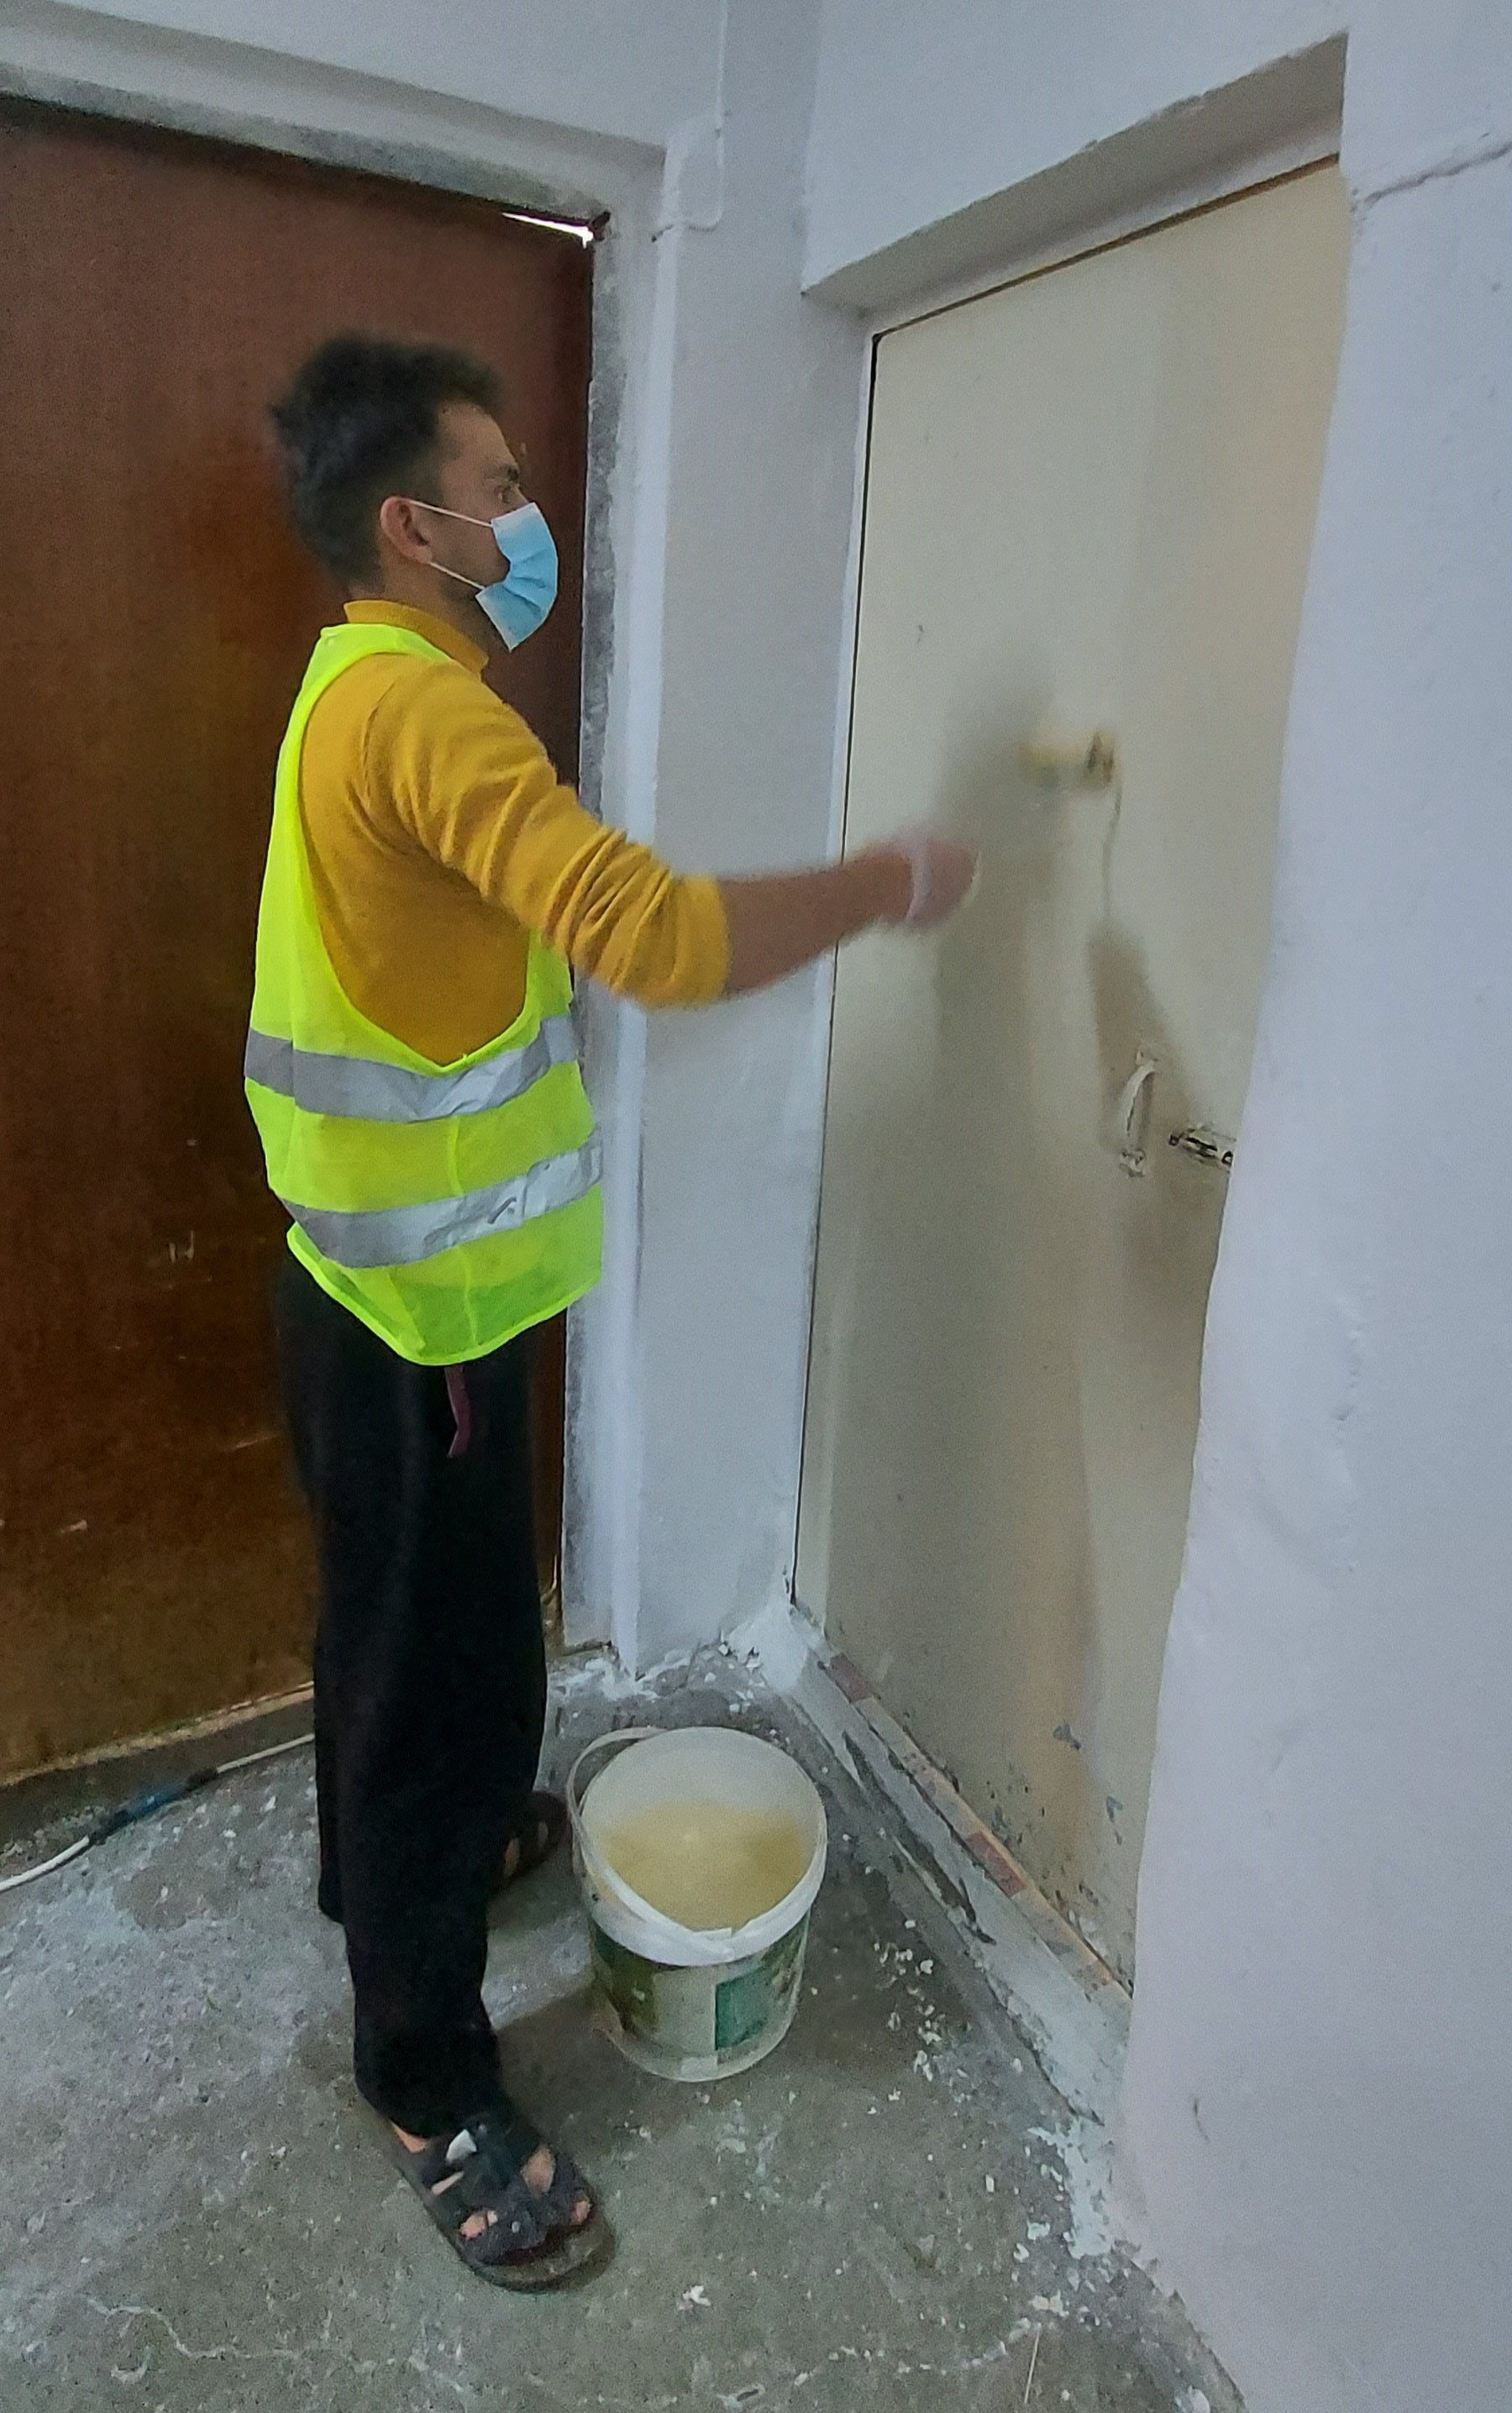 Saud Hussein works in one of the houses in Baroshke neighbourhood in Duhok, where UN-Habitat is rehabilitating 200 houses resided by IDPs and host community (3 December 2020)